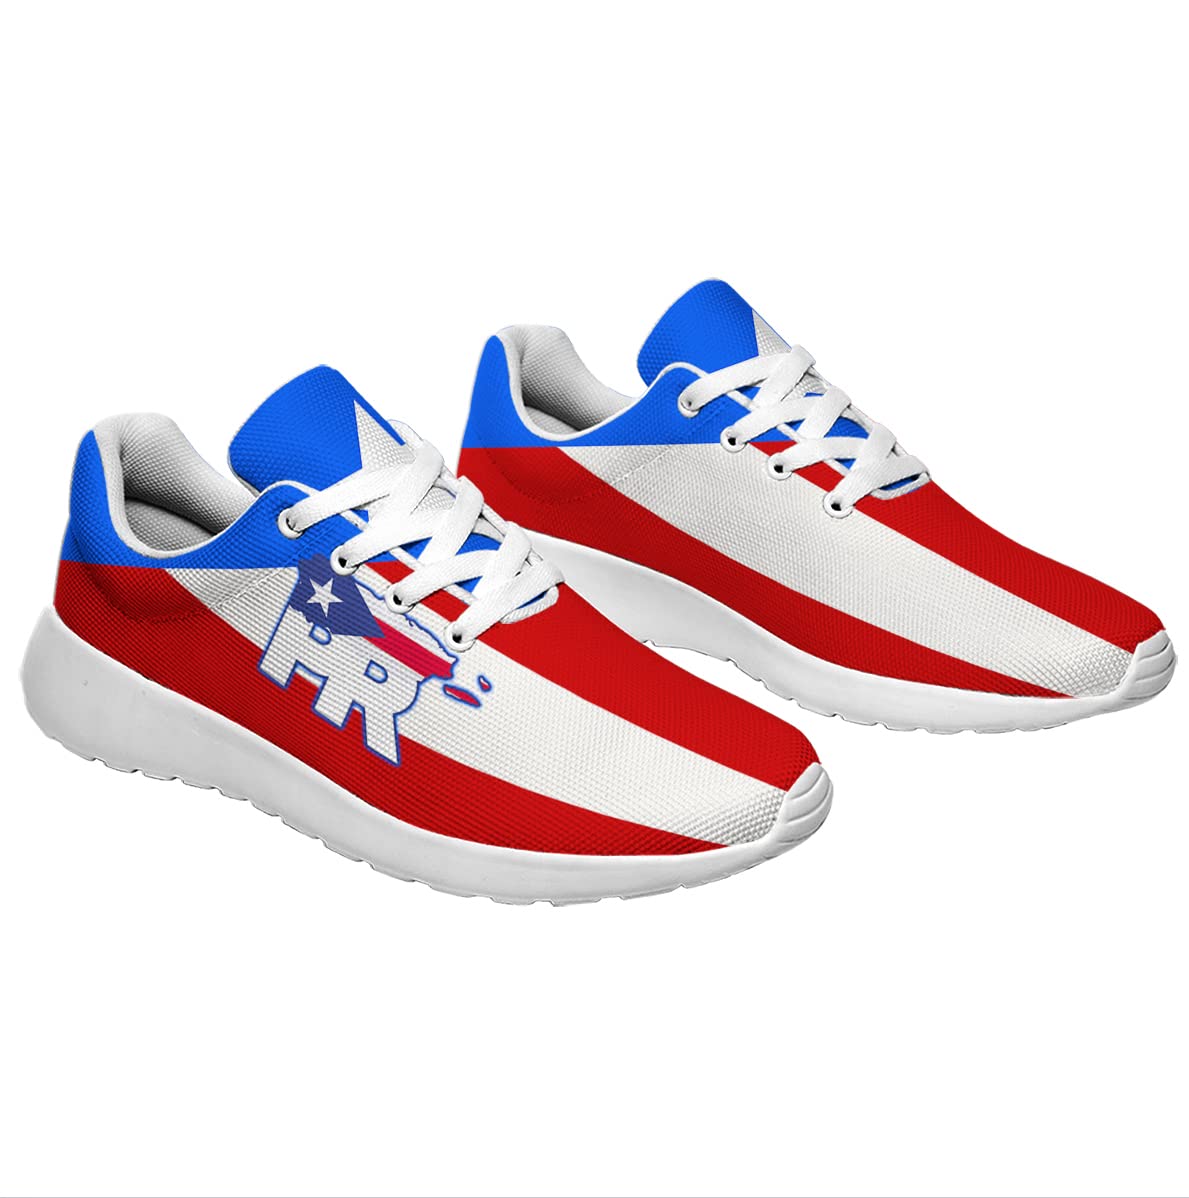 Puerto Rico Shoes Mens Womens Running Tennis Shoes Athletic Casual Puerto Rico Flag Sneakers Gifts for Friends White Size 10